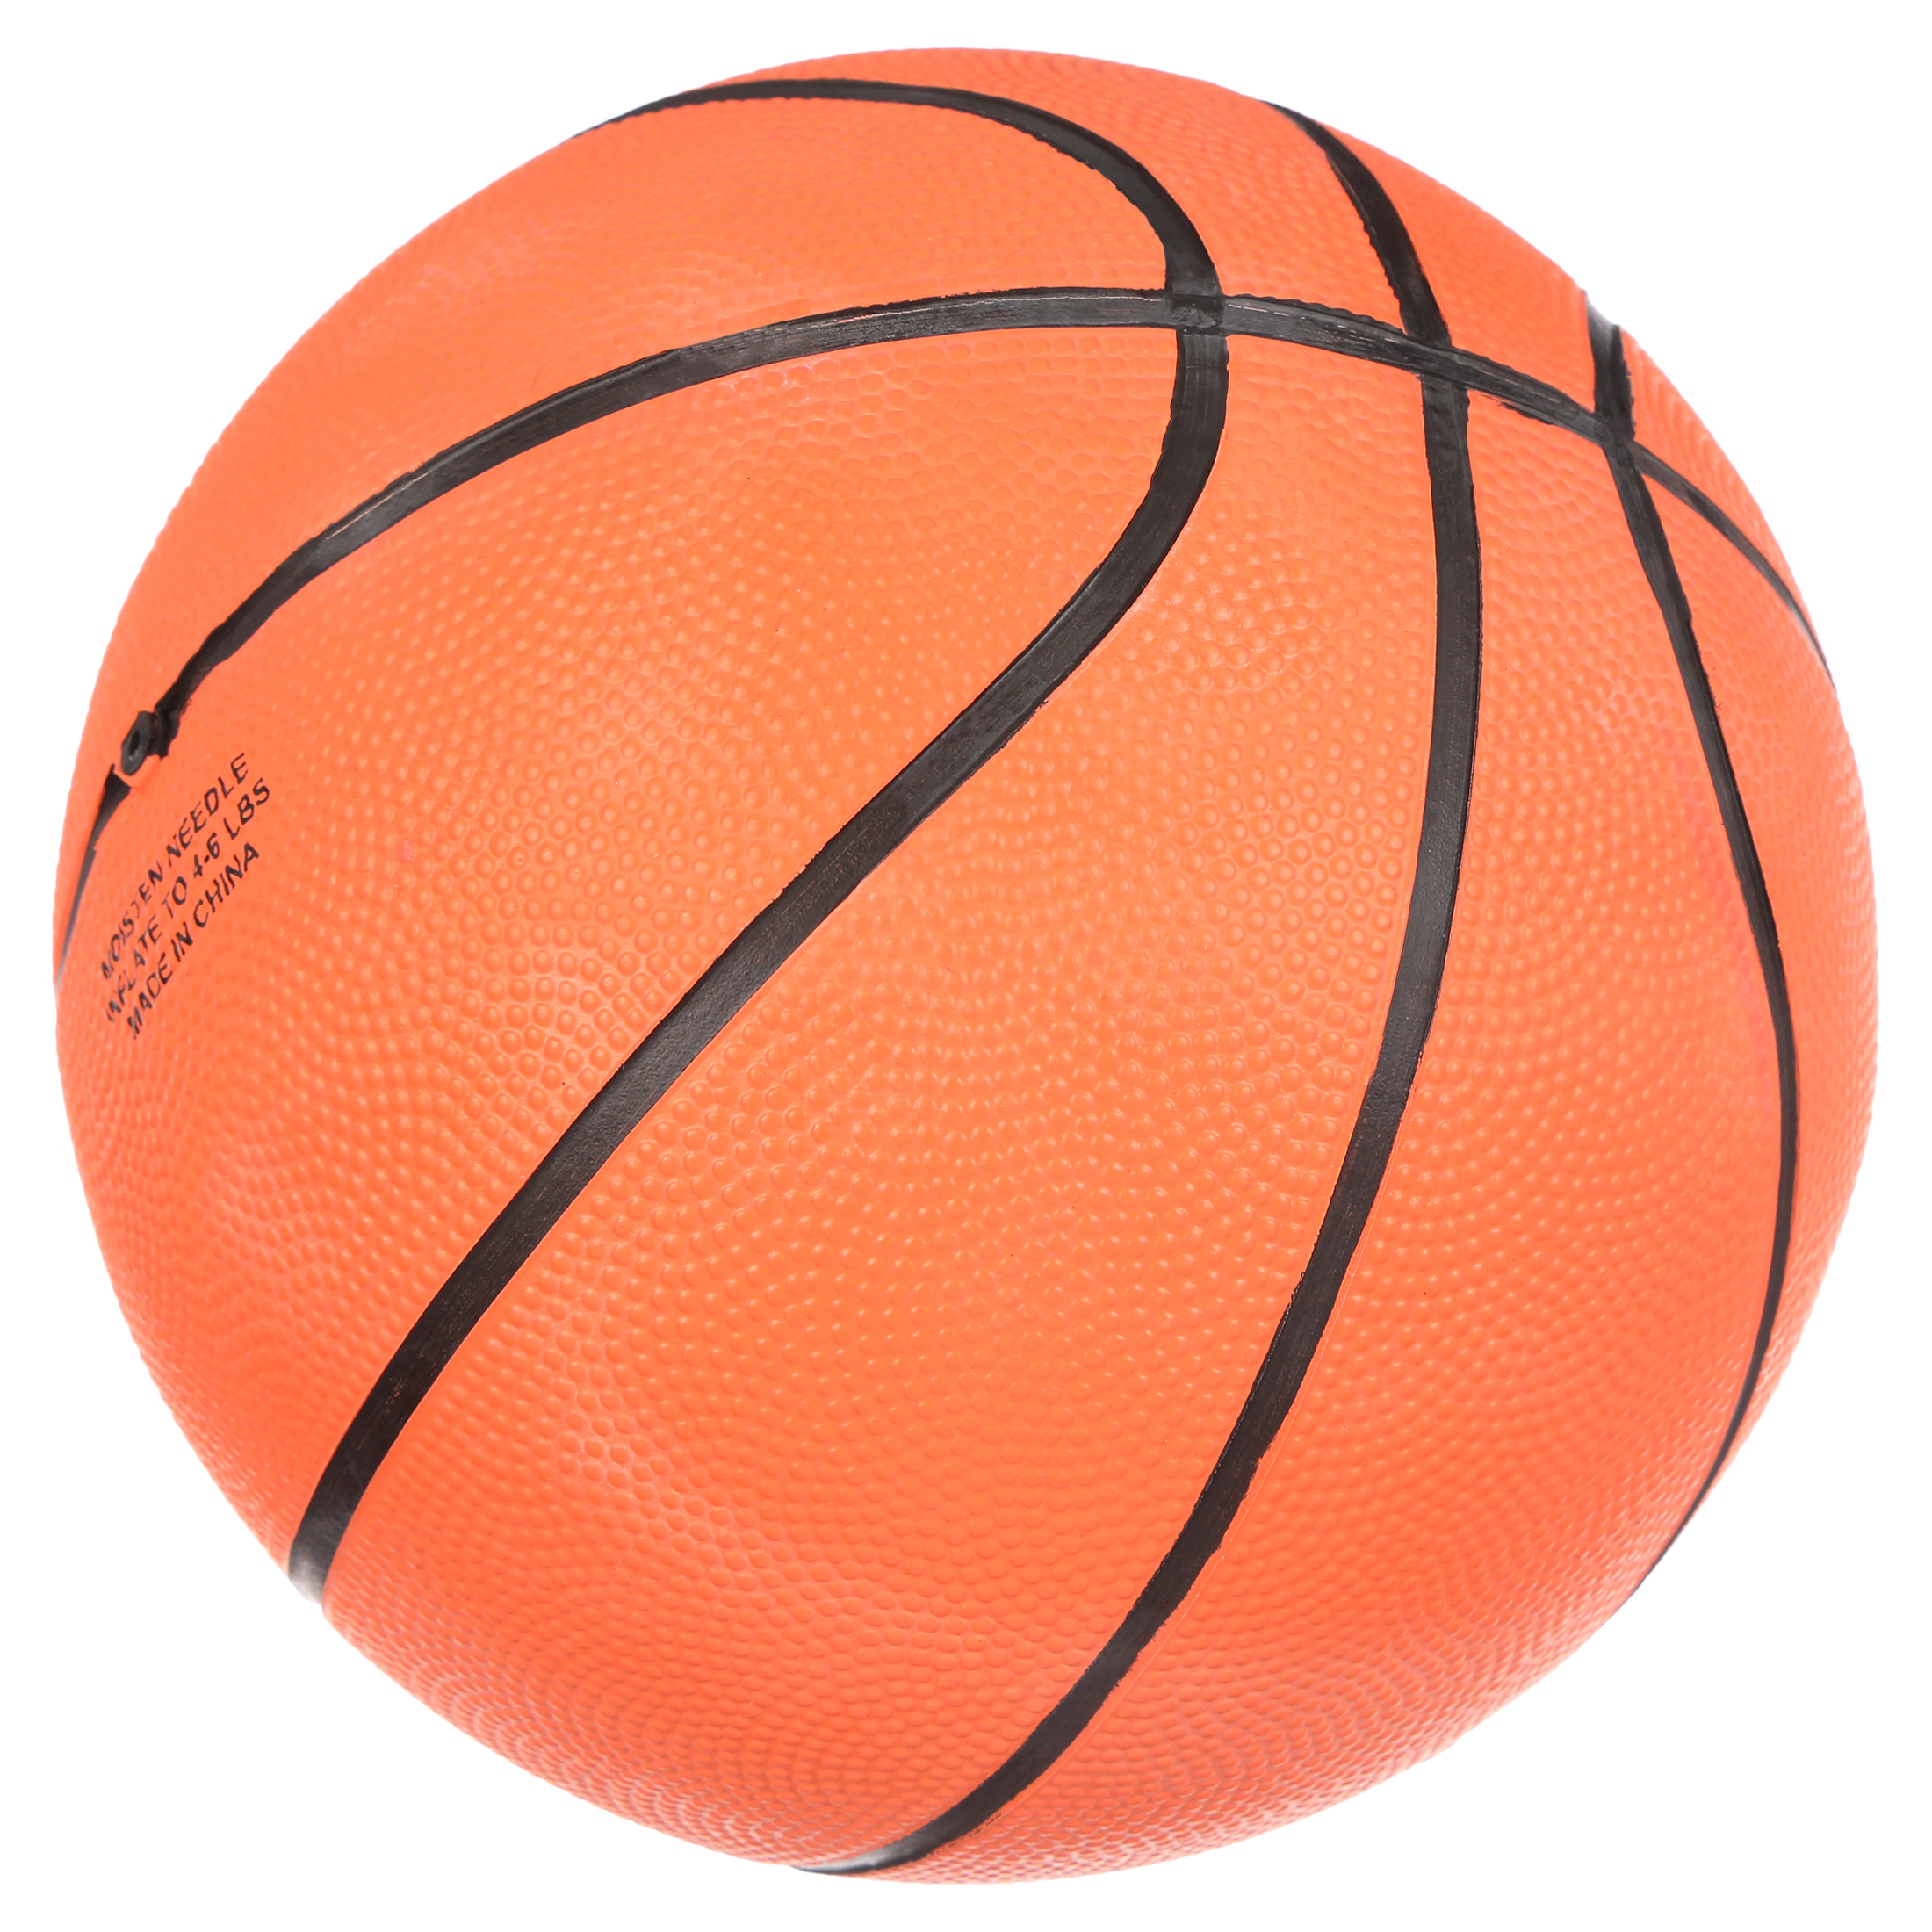 MD Sports 7" 3pcs Rubber Arcade Basketballs Replacement - image 5 of 10